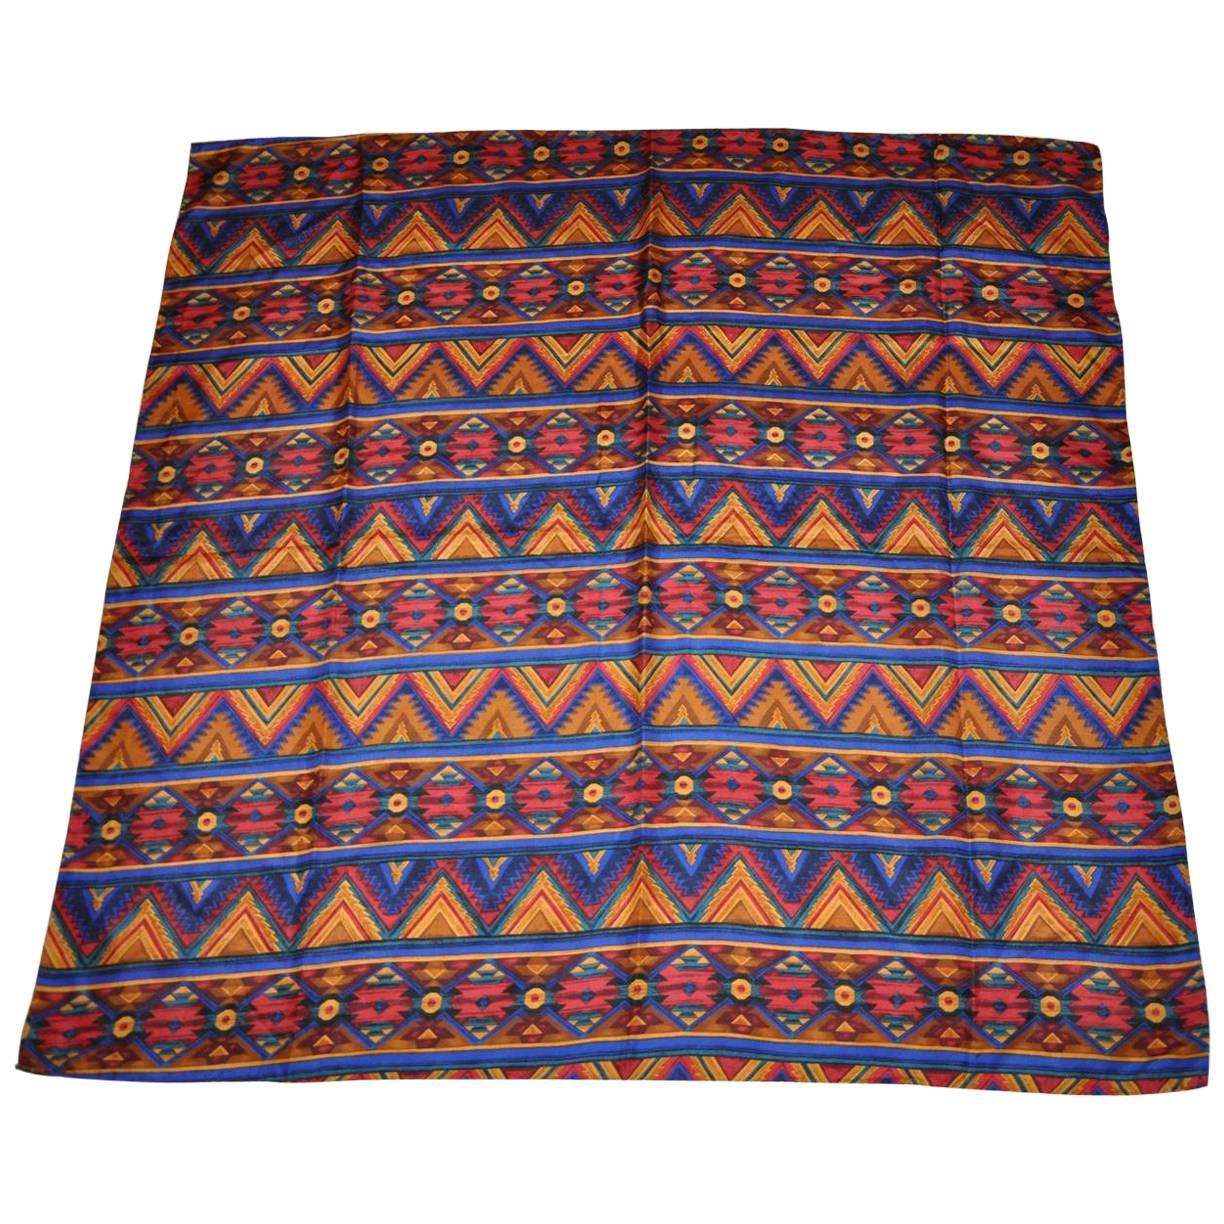 Harve Benard Multi-Color "Tribal" Silk Scarf with Hand-Rolled Edges For Sale